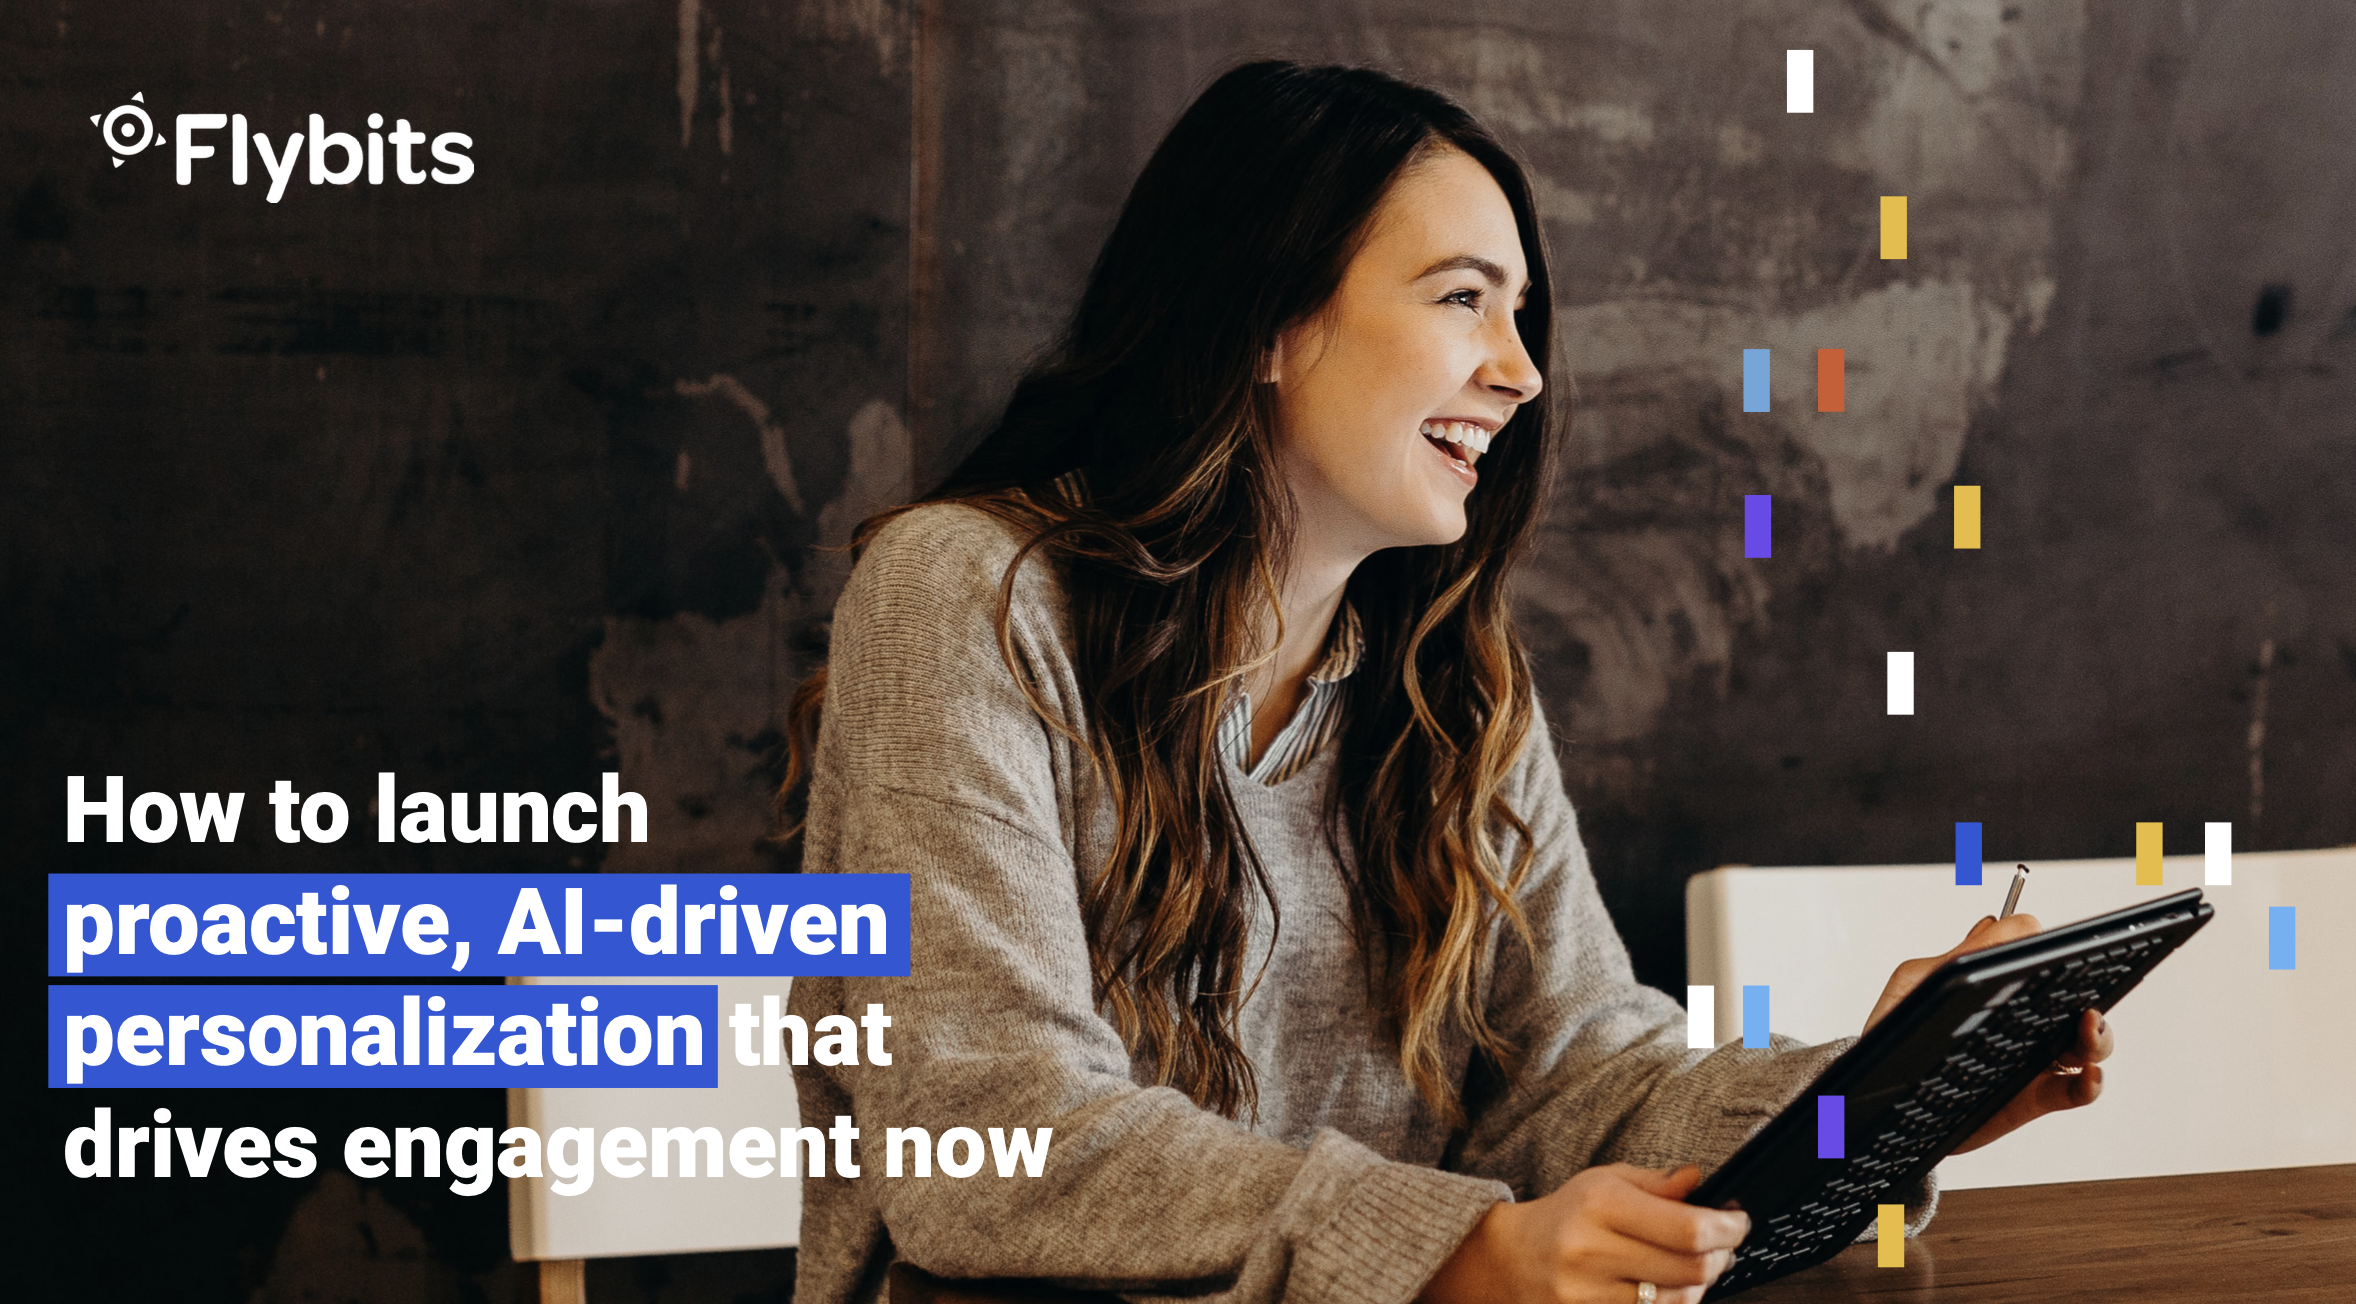 Ebook cover - how to launch proactive, AI-driven, personalization that drives engagement now